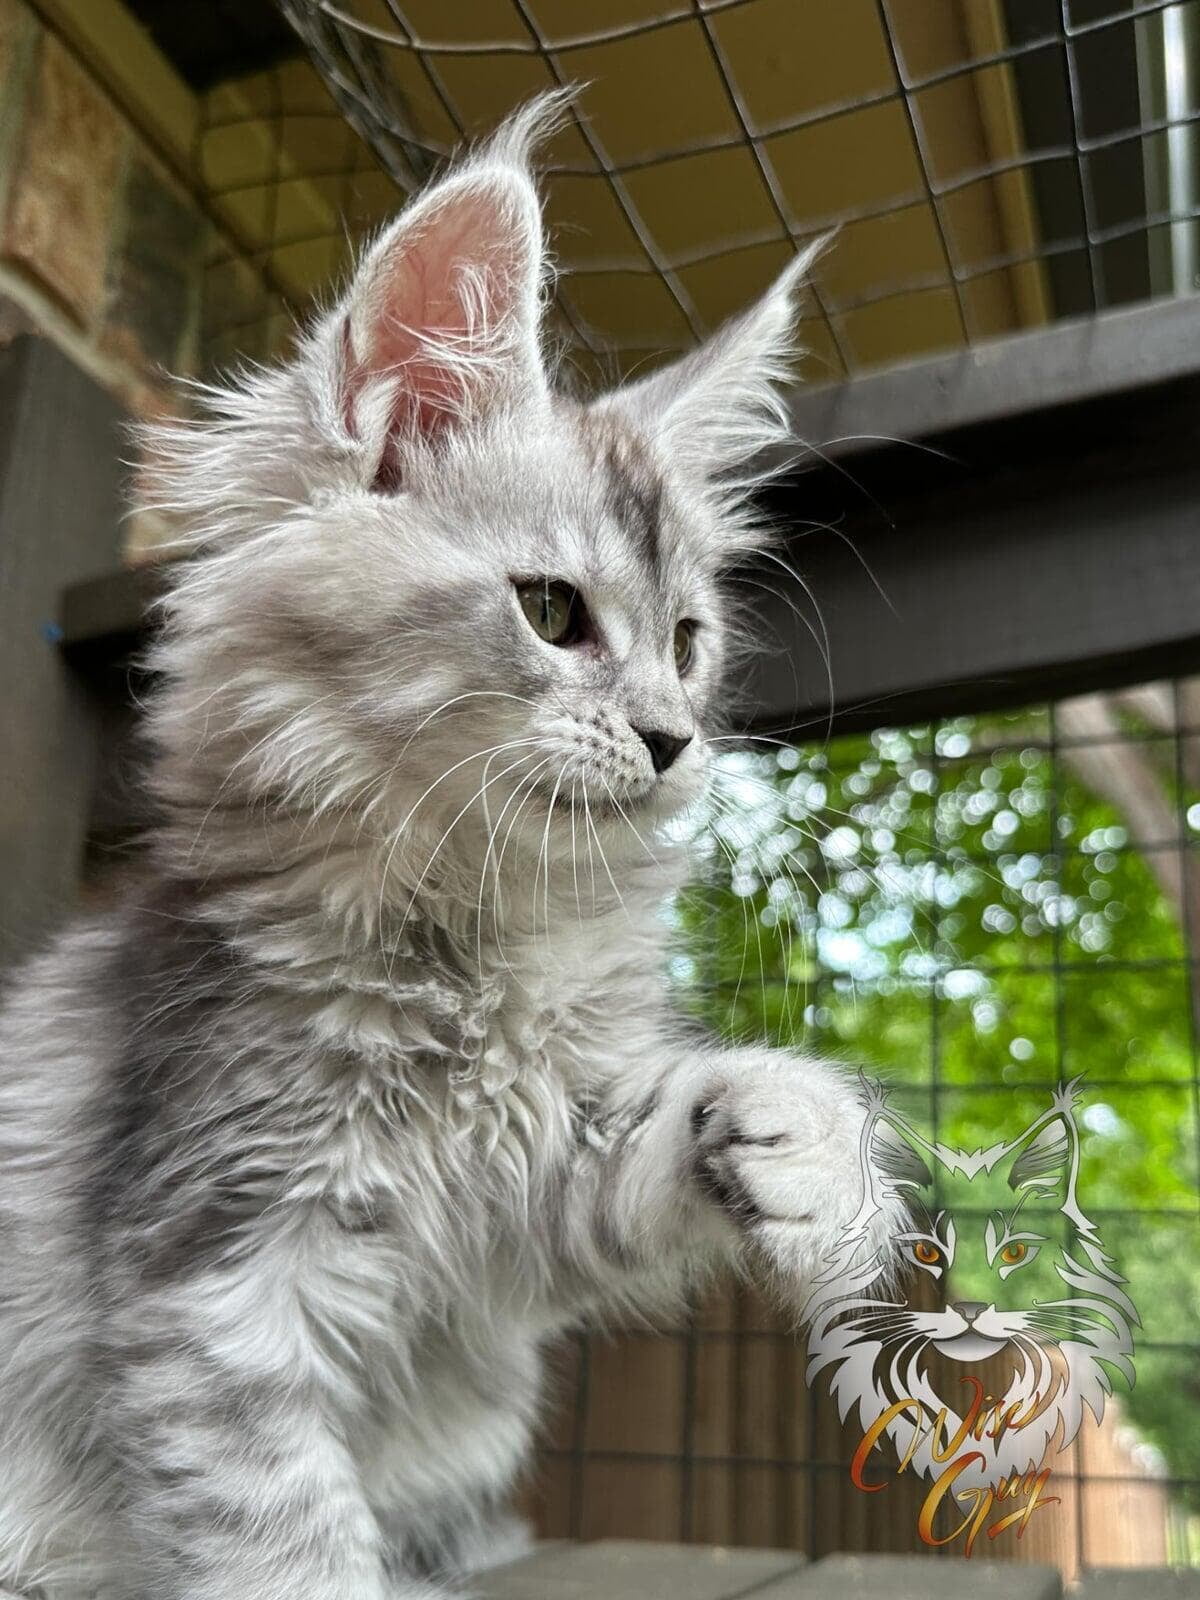 Black silver Maine coon kitten batting at the air.